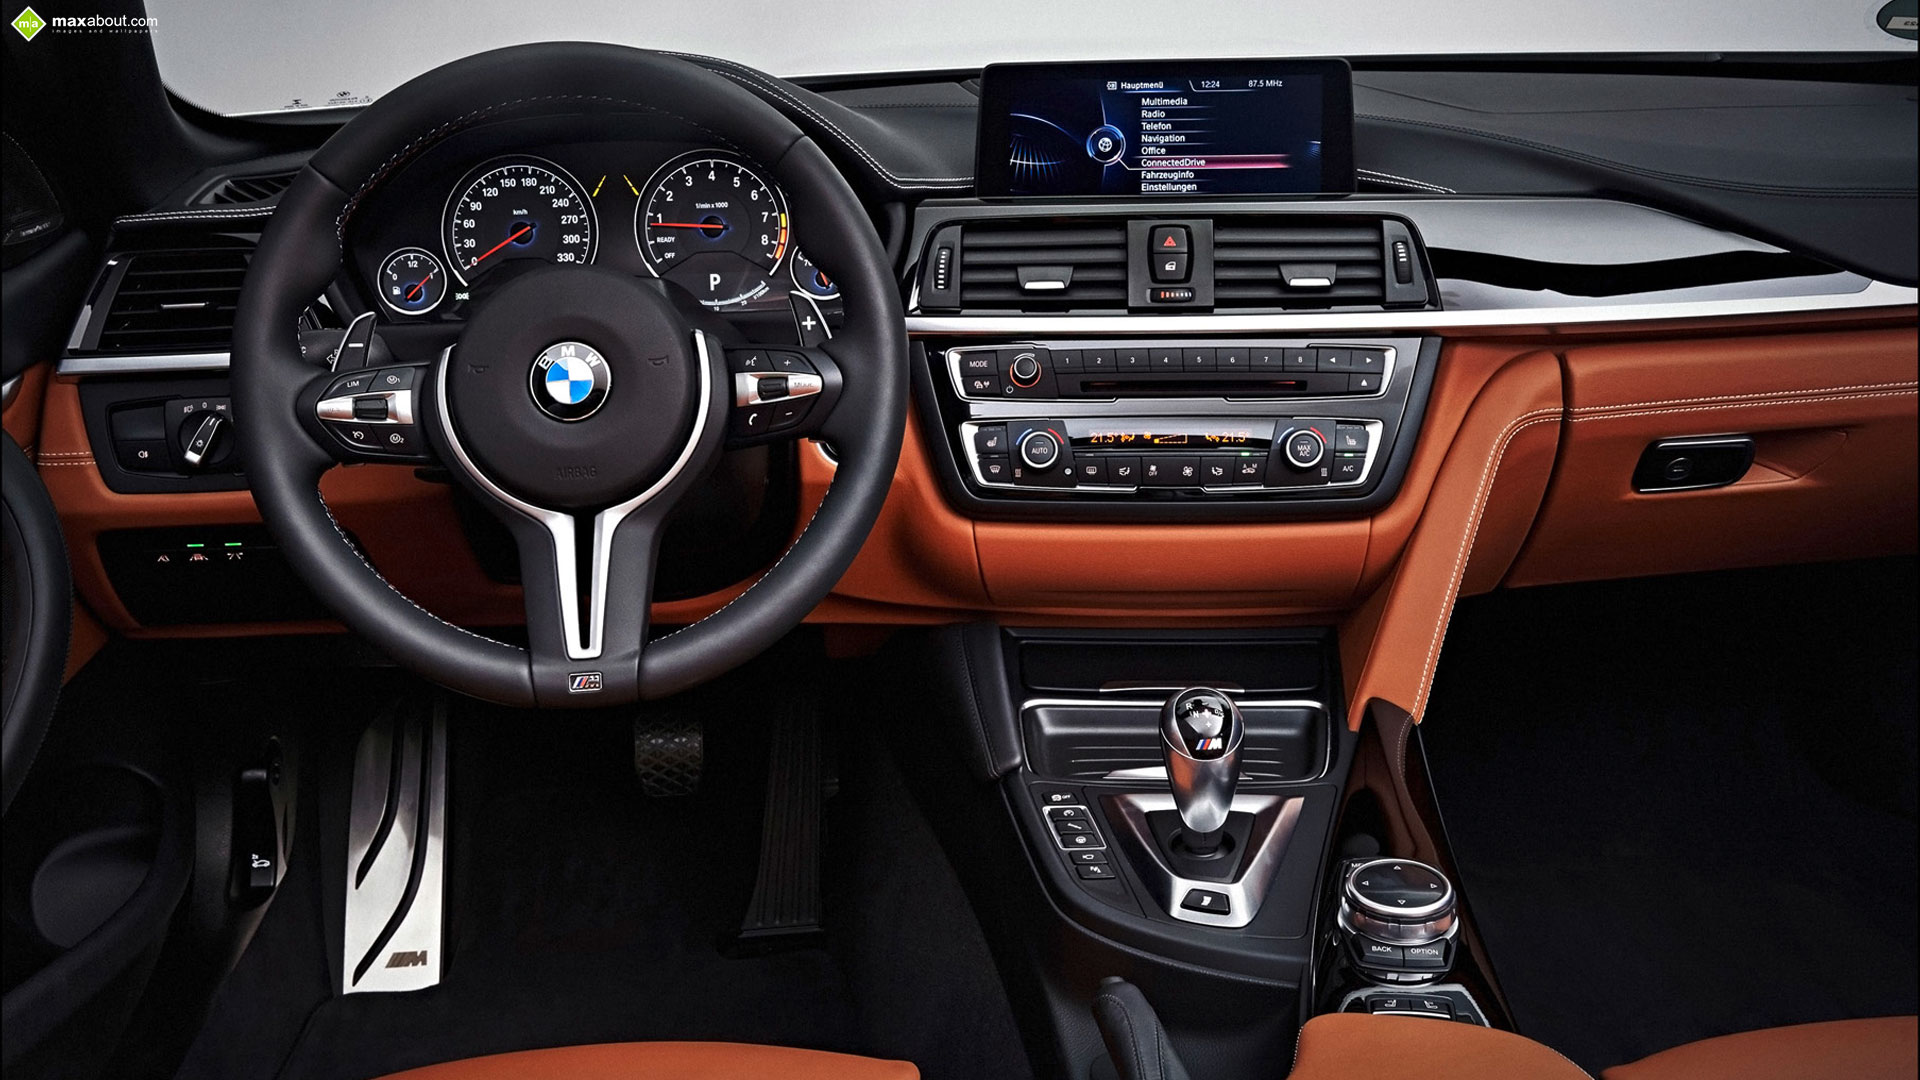 2015 Bmw M4 Cabrio Wallpapers